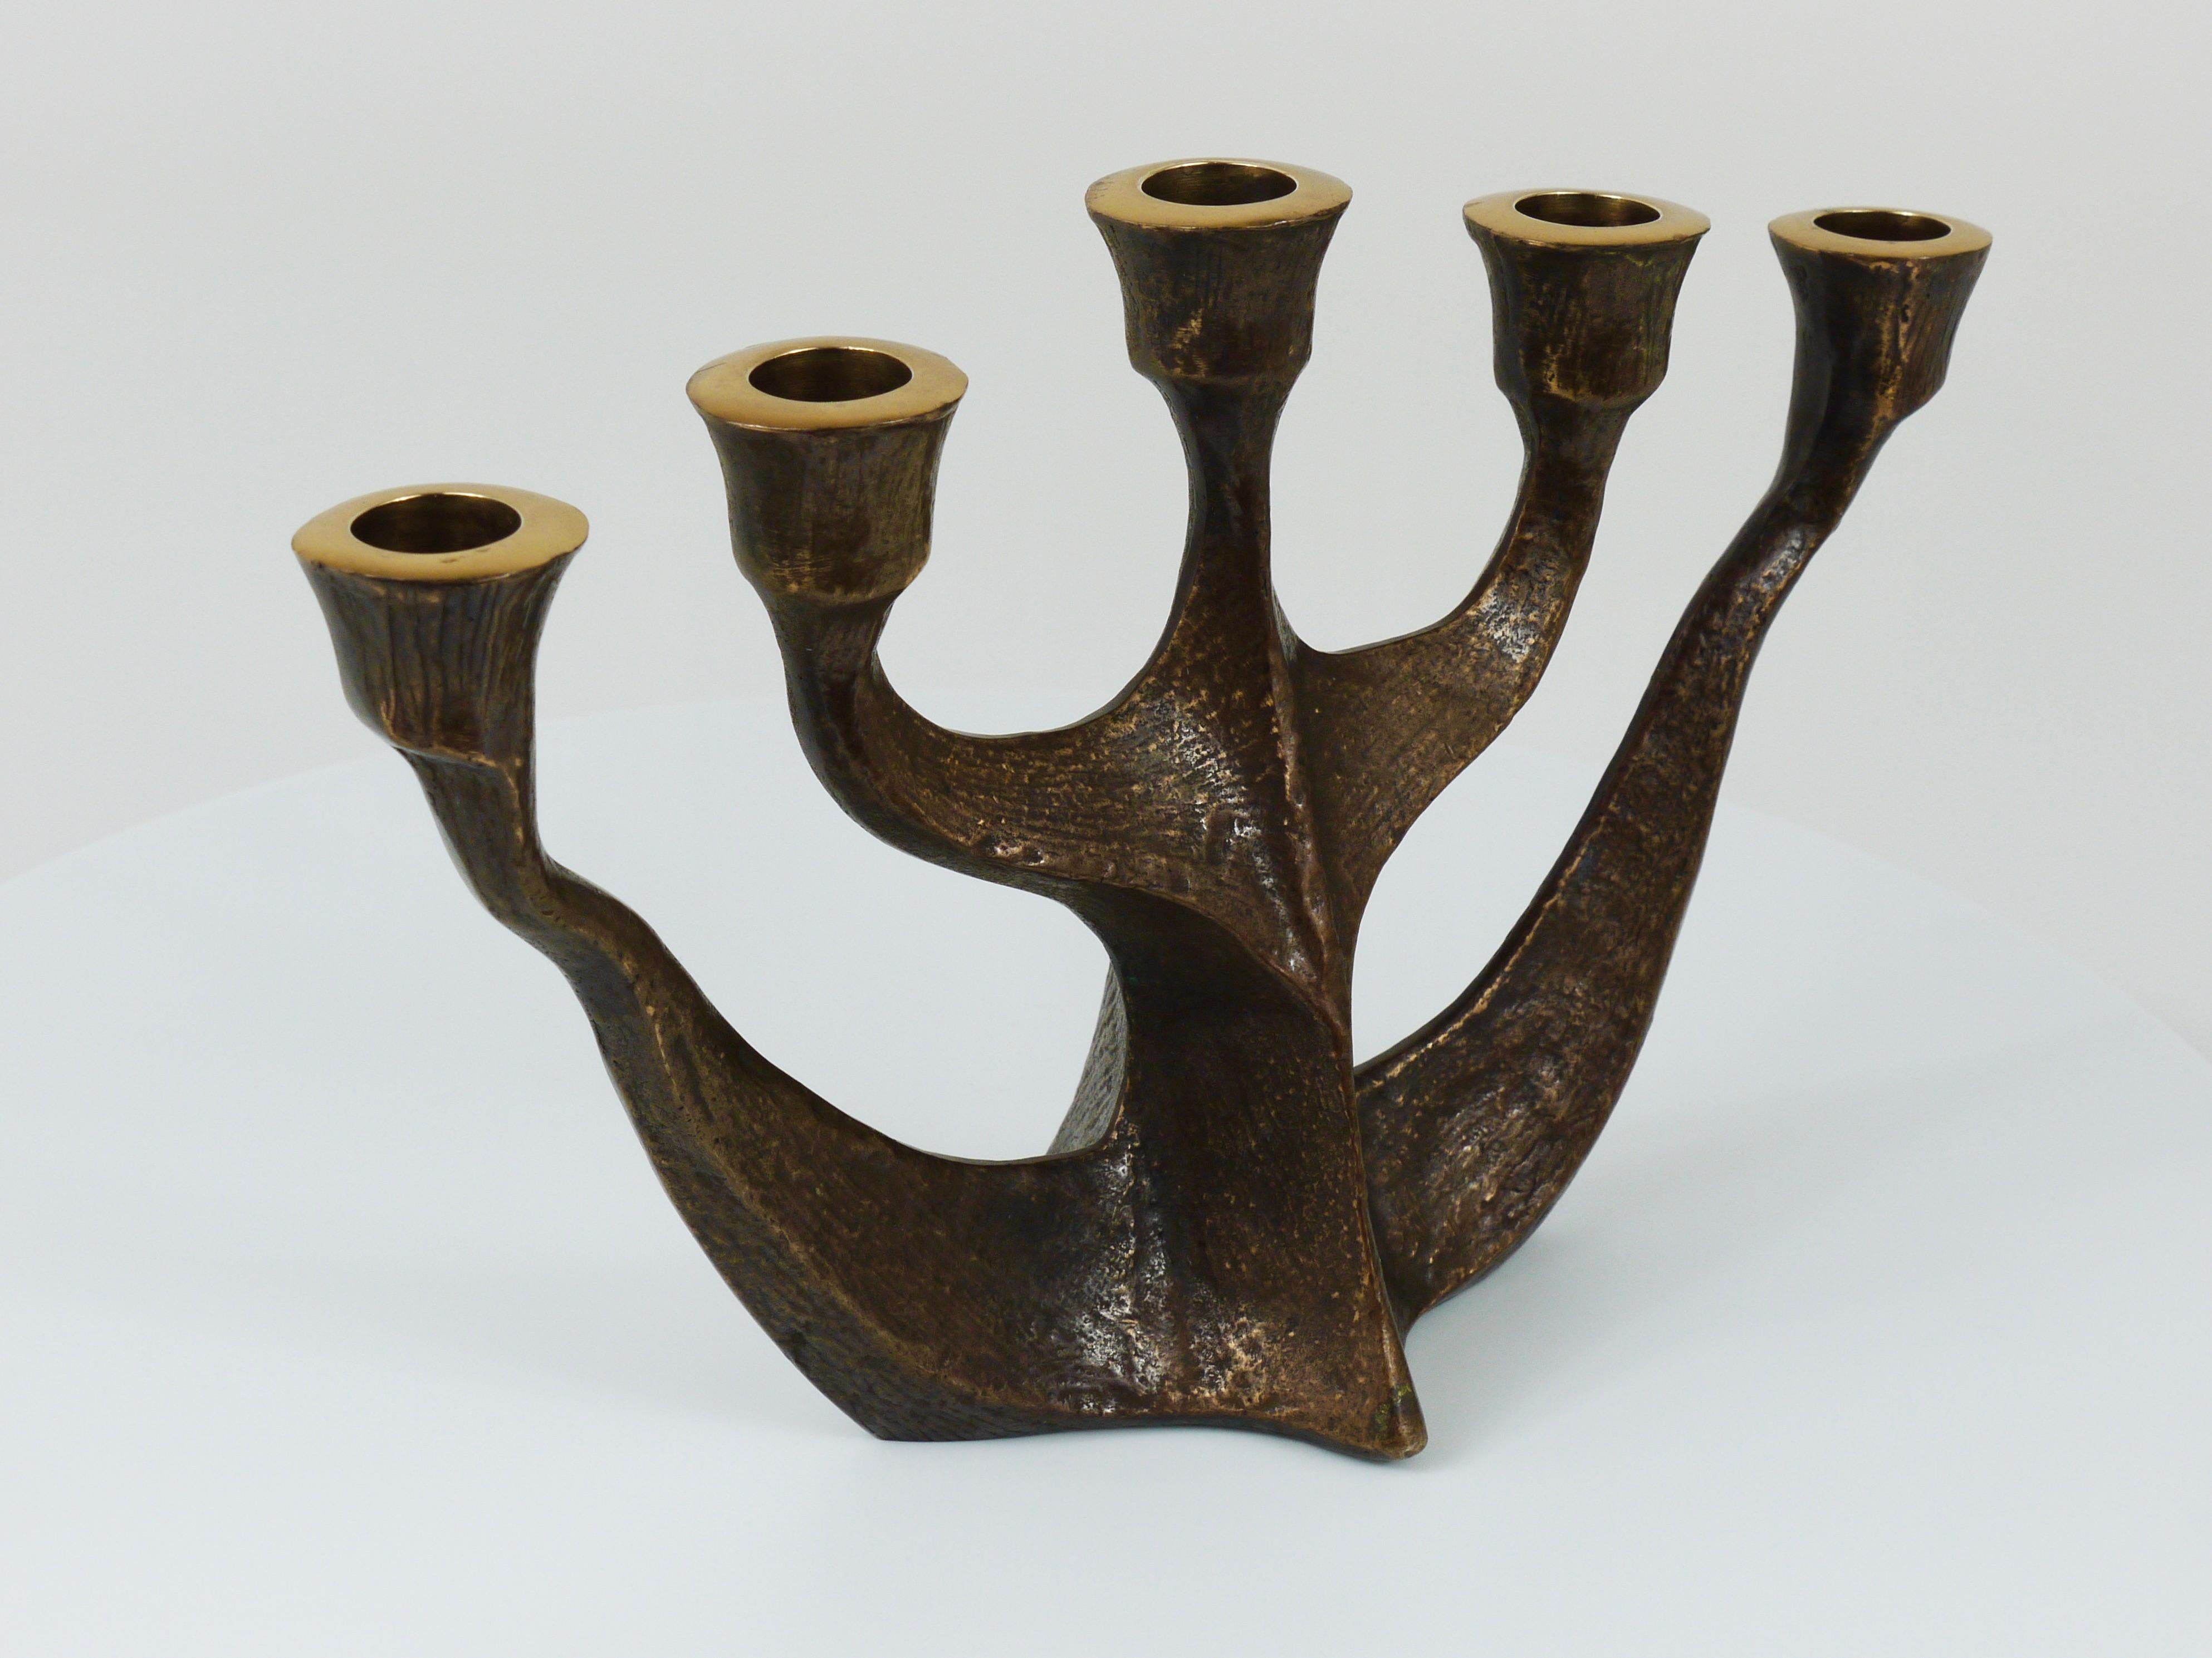 Up to Two Midcentury Brutalist Bronze Candleholders by Michael Harjes, 1960s For Sale 7